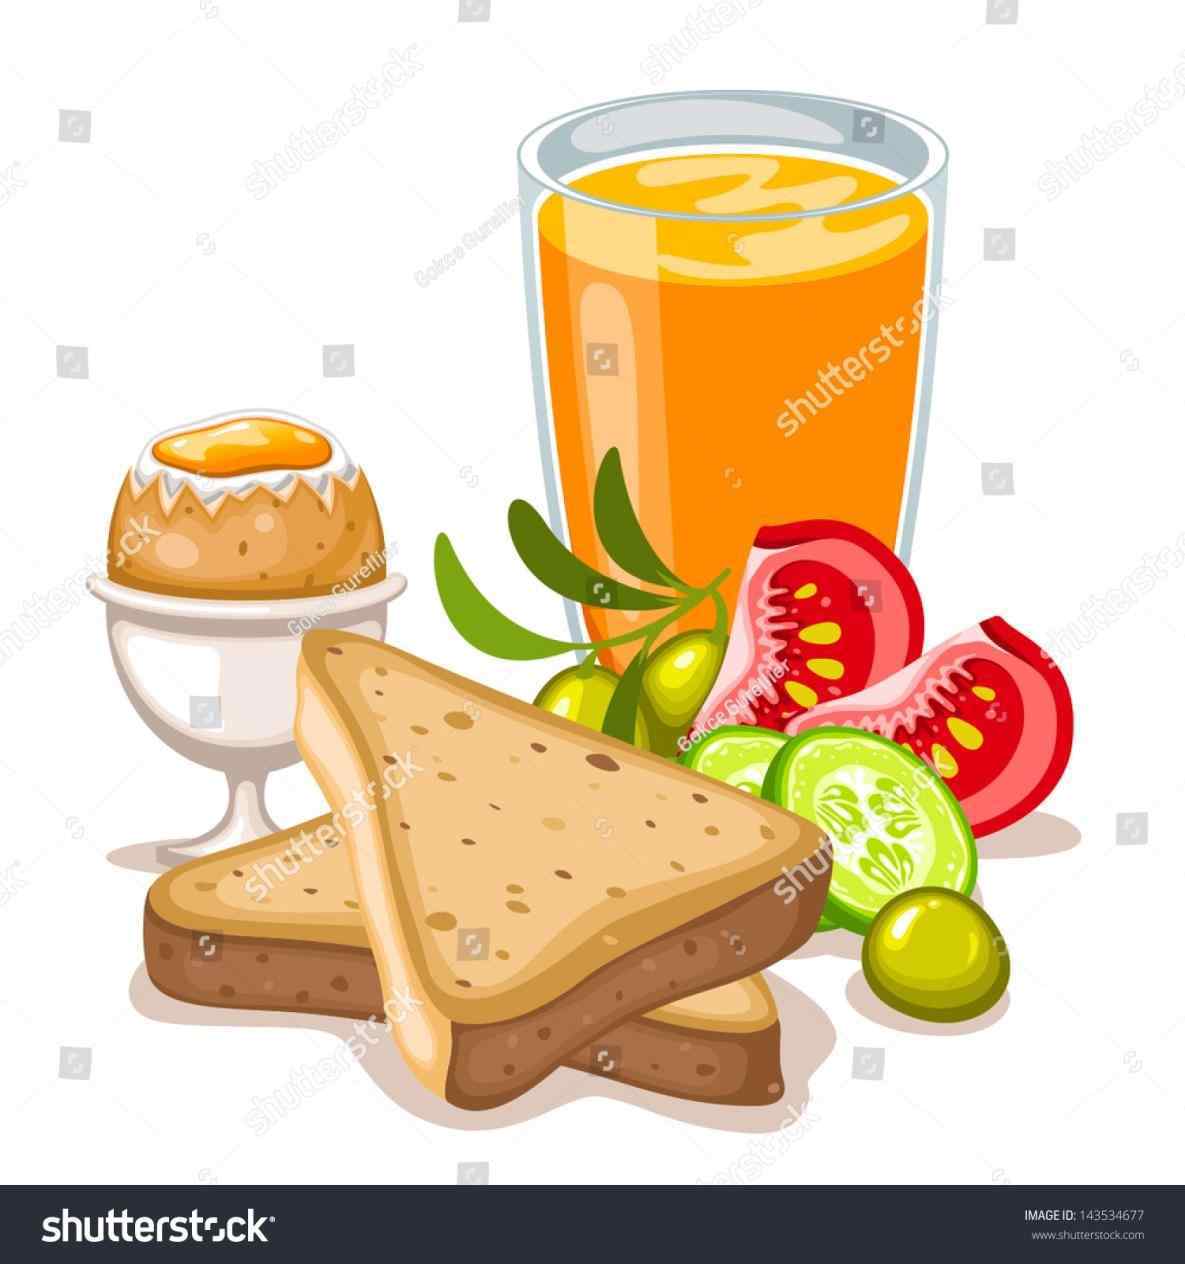 Healthy breakfast clipart 6 » Clipart Station.